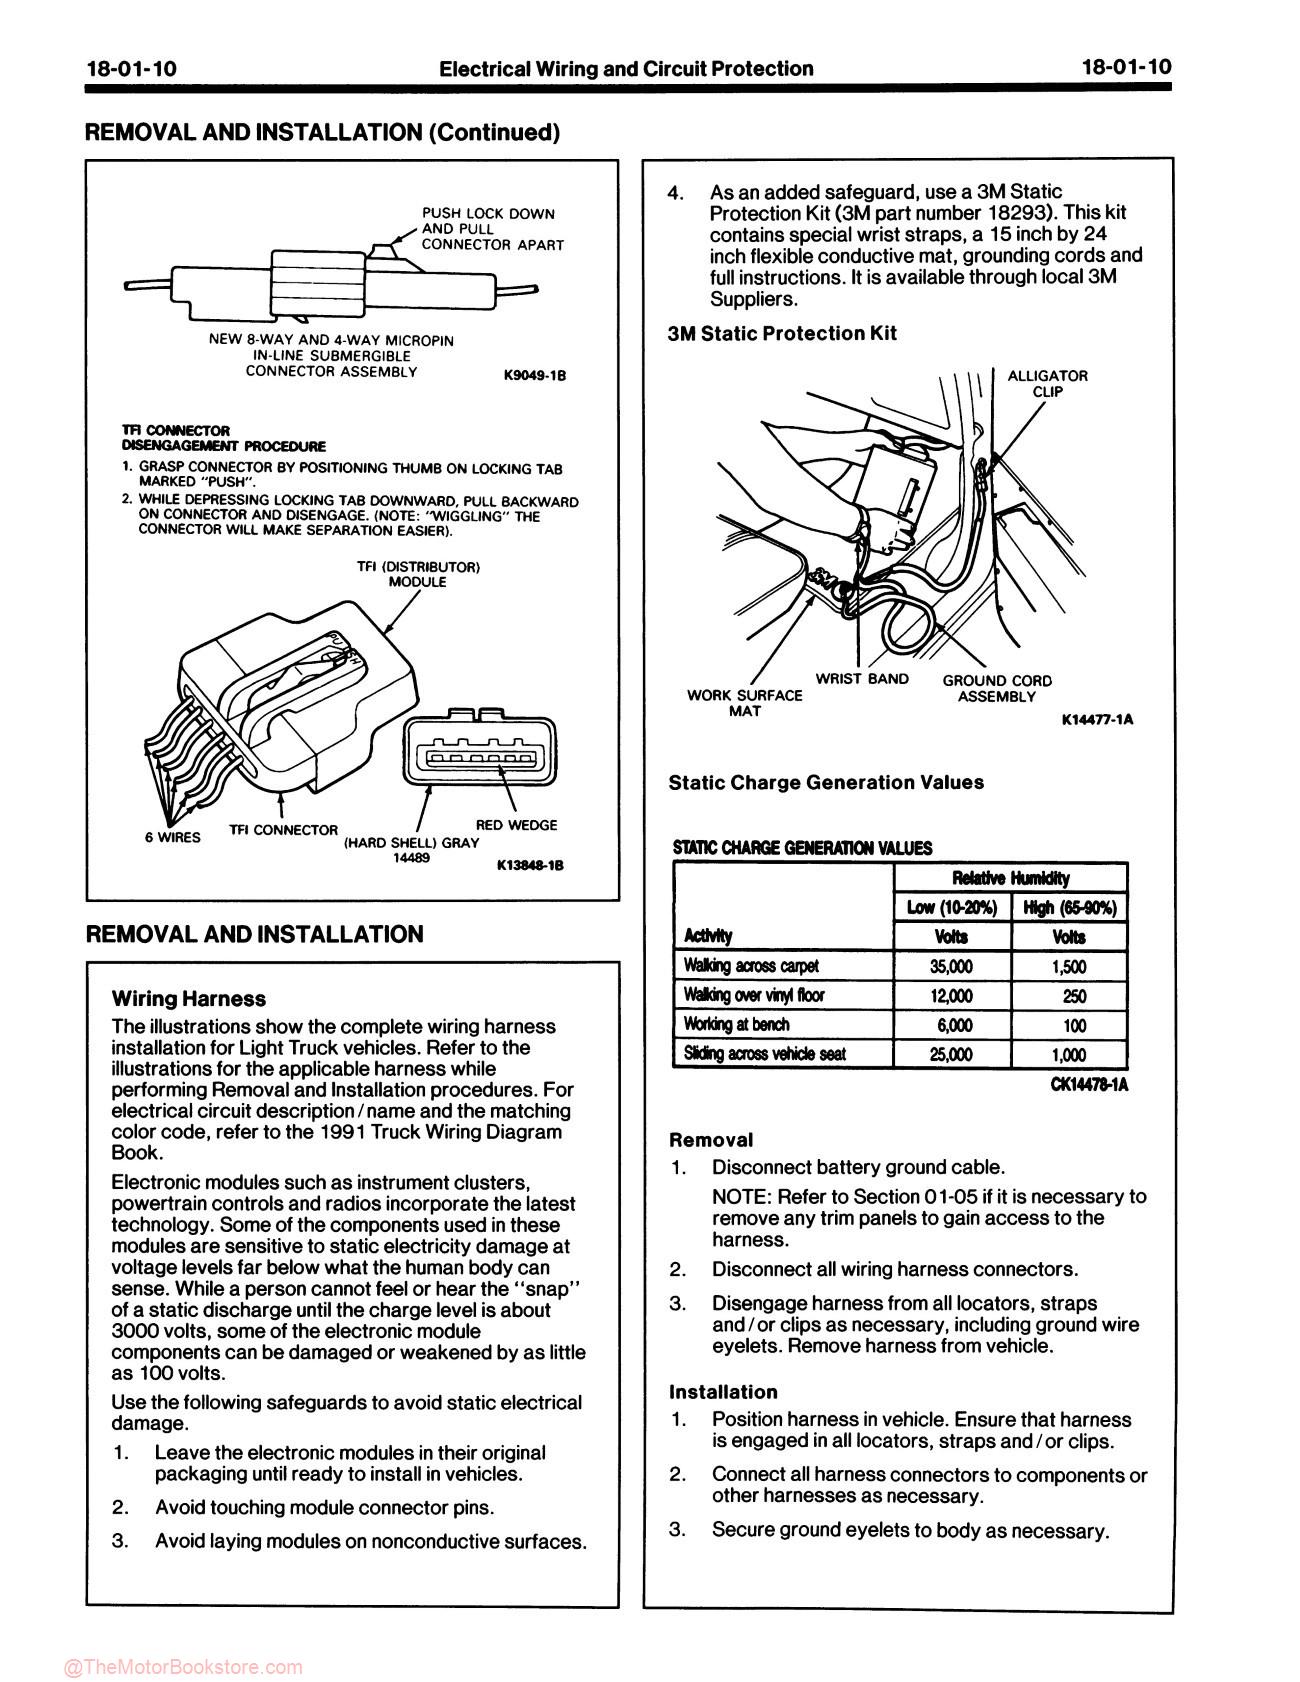 1991 Ford Truck, Bronco, Econoline Shop Manual - F-Series - Sample Page 3